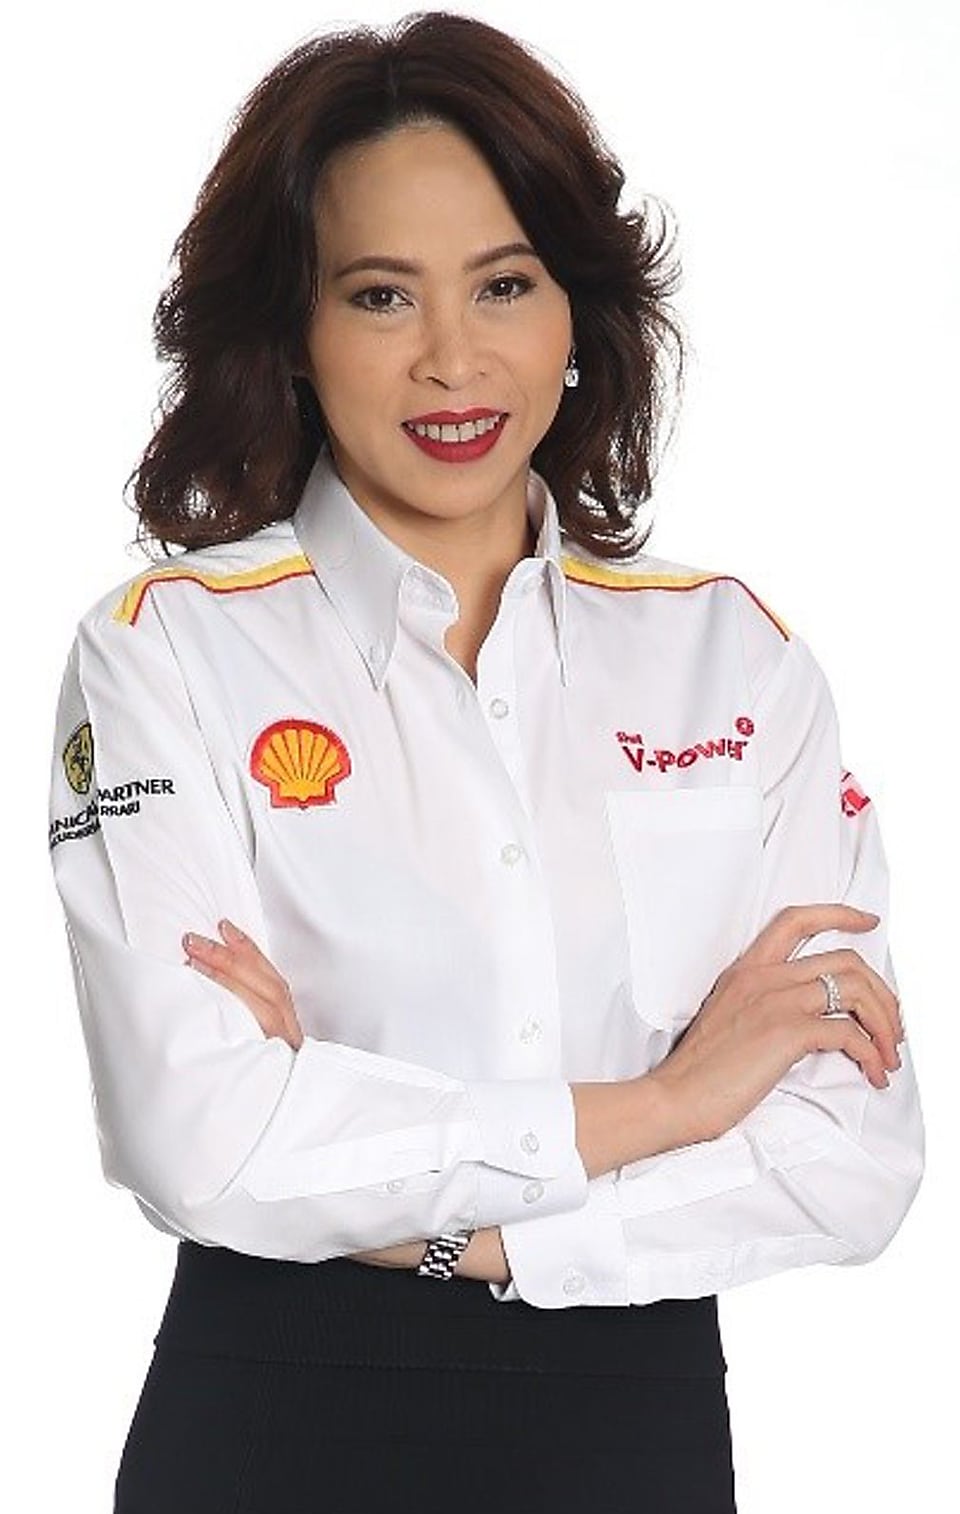 Lady smiling in white shirt with shell